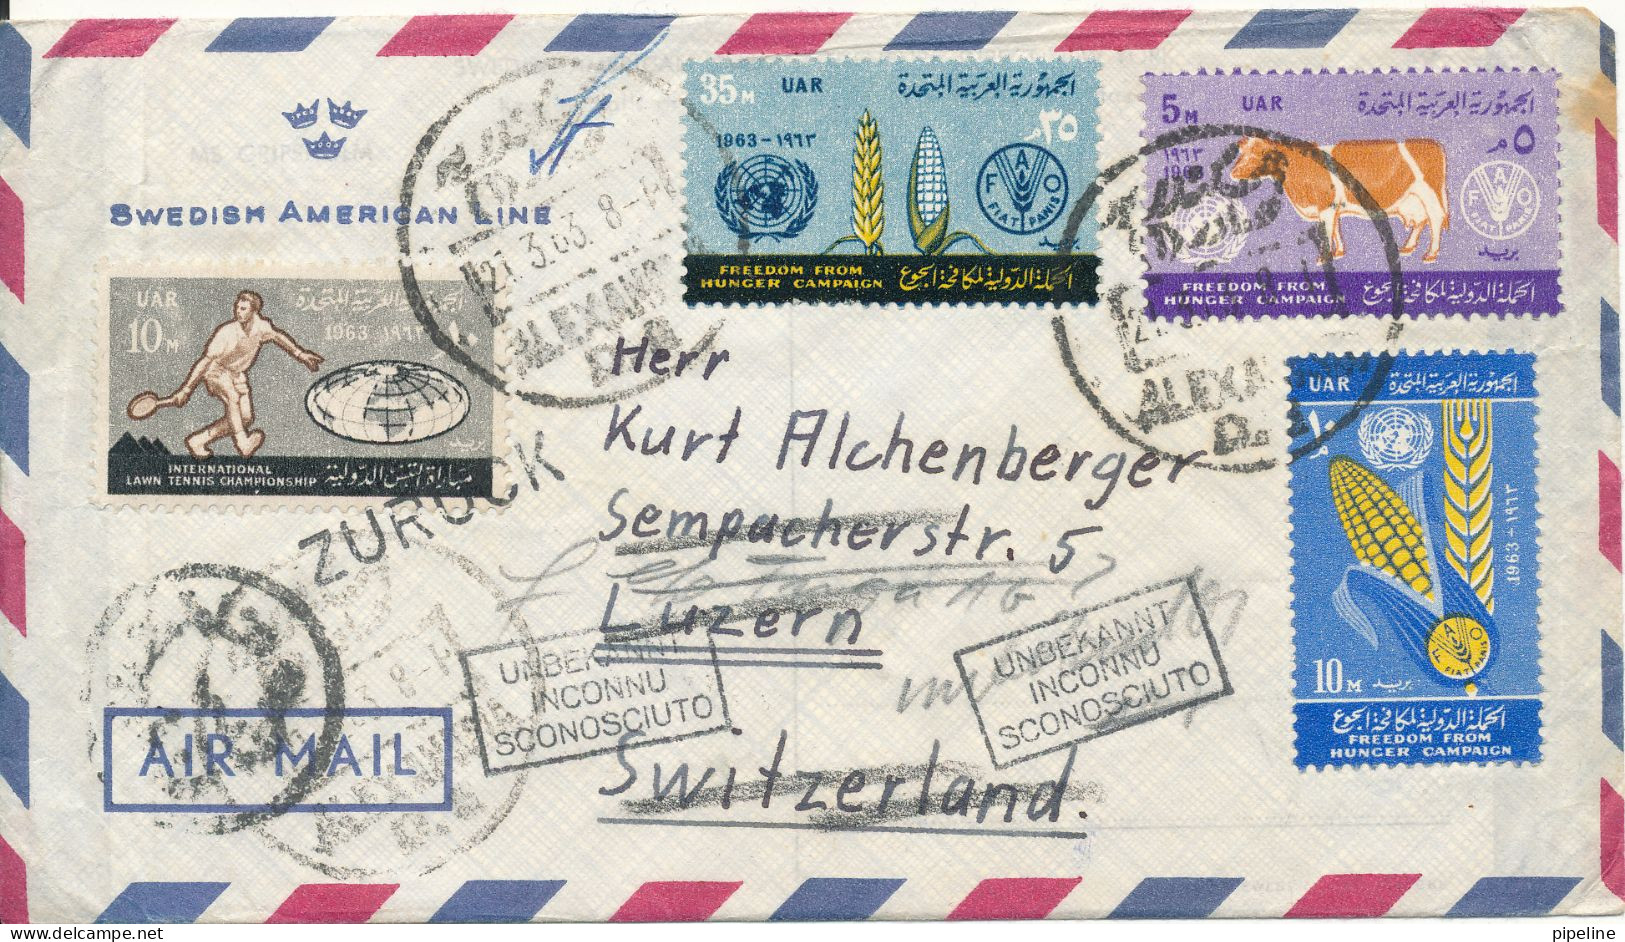 UAR Egypt Air Mail Cover Sent To Switzerland 21-3-1963 And Returned Because Of Unknown Address (Swedish American Line) - Aéreo